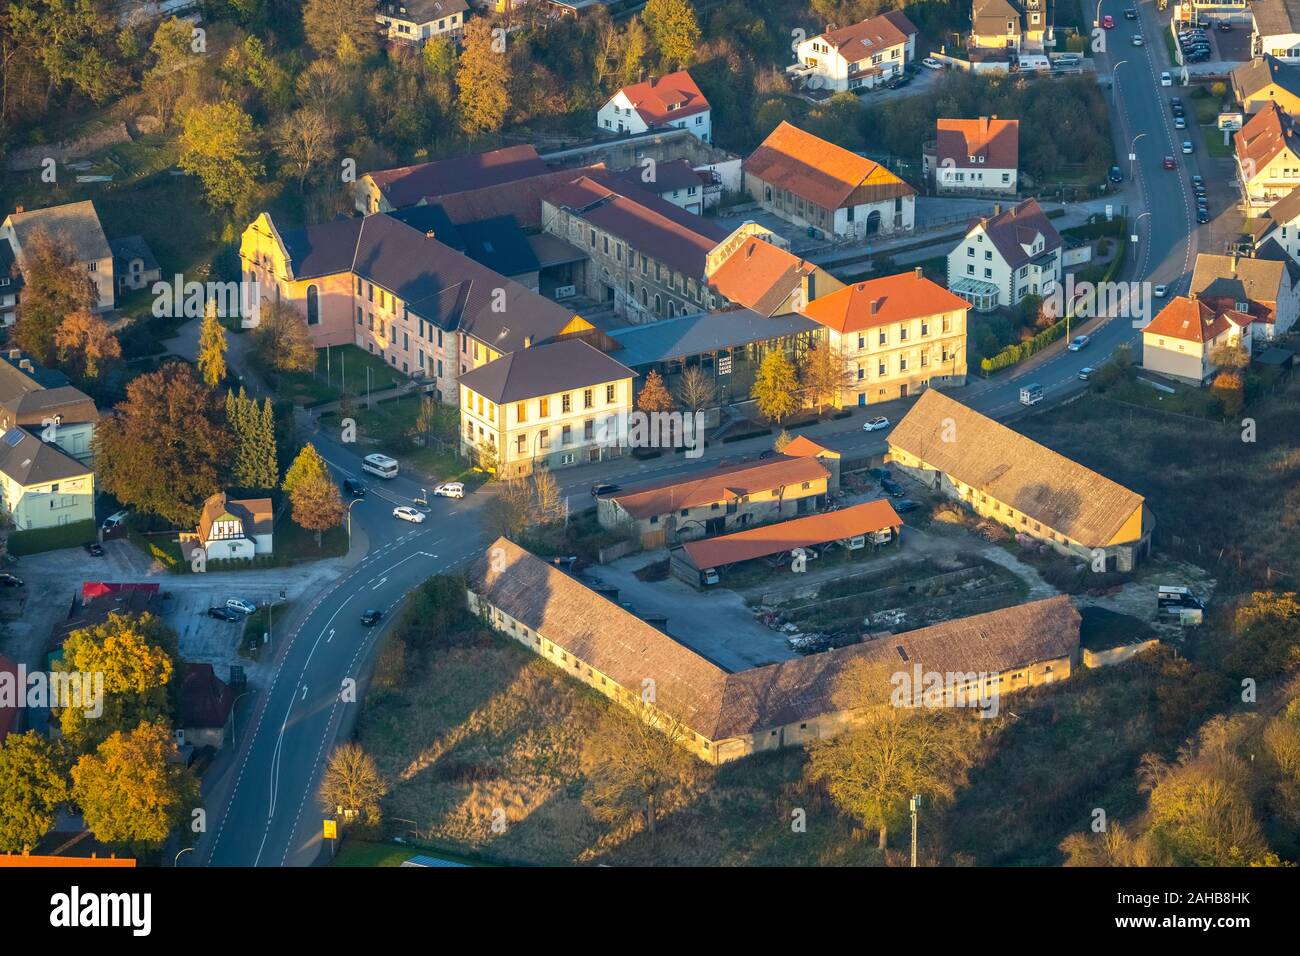 Aerial photograph, Bredelar Monastery, Friends of Bredelar Monastery, Meeting and Cultural Centre, Teaching and Scahugießerei, Bredelar, Marsberg, Sau Stock Photo